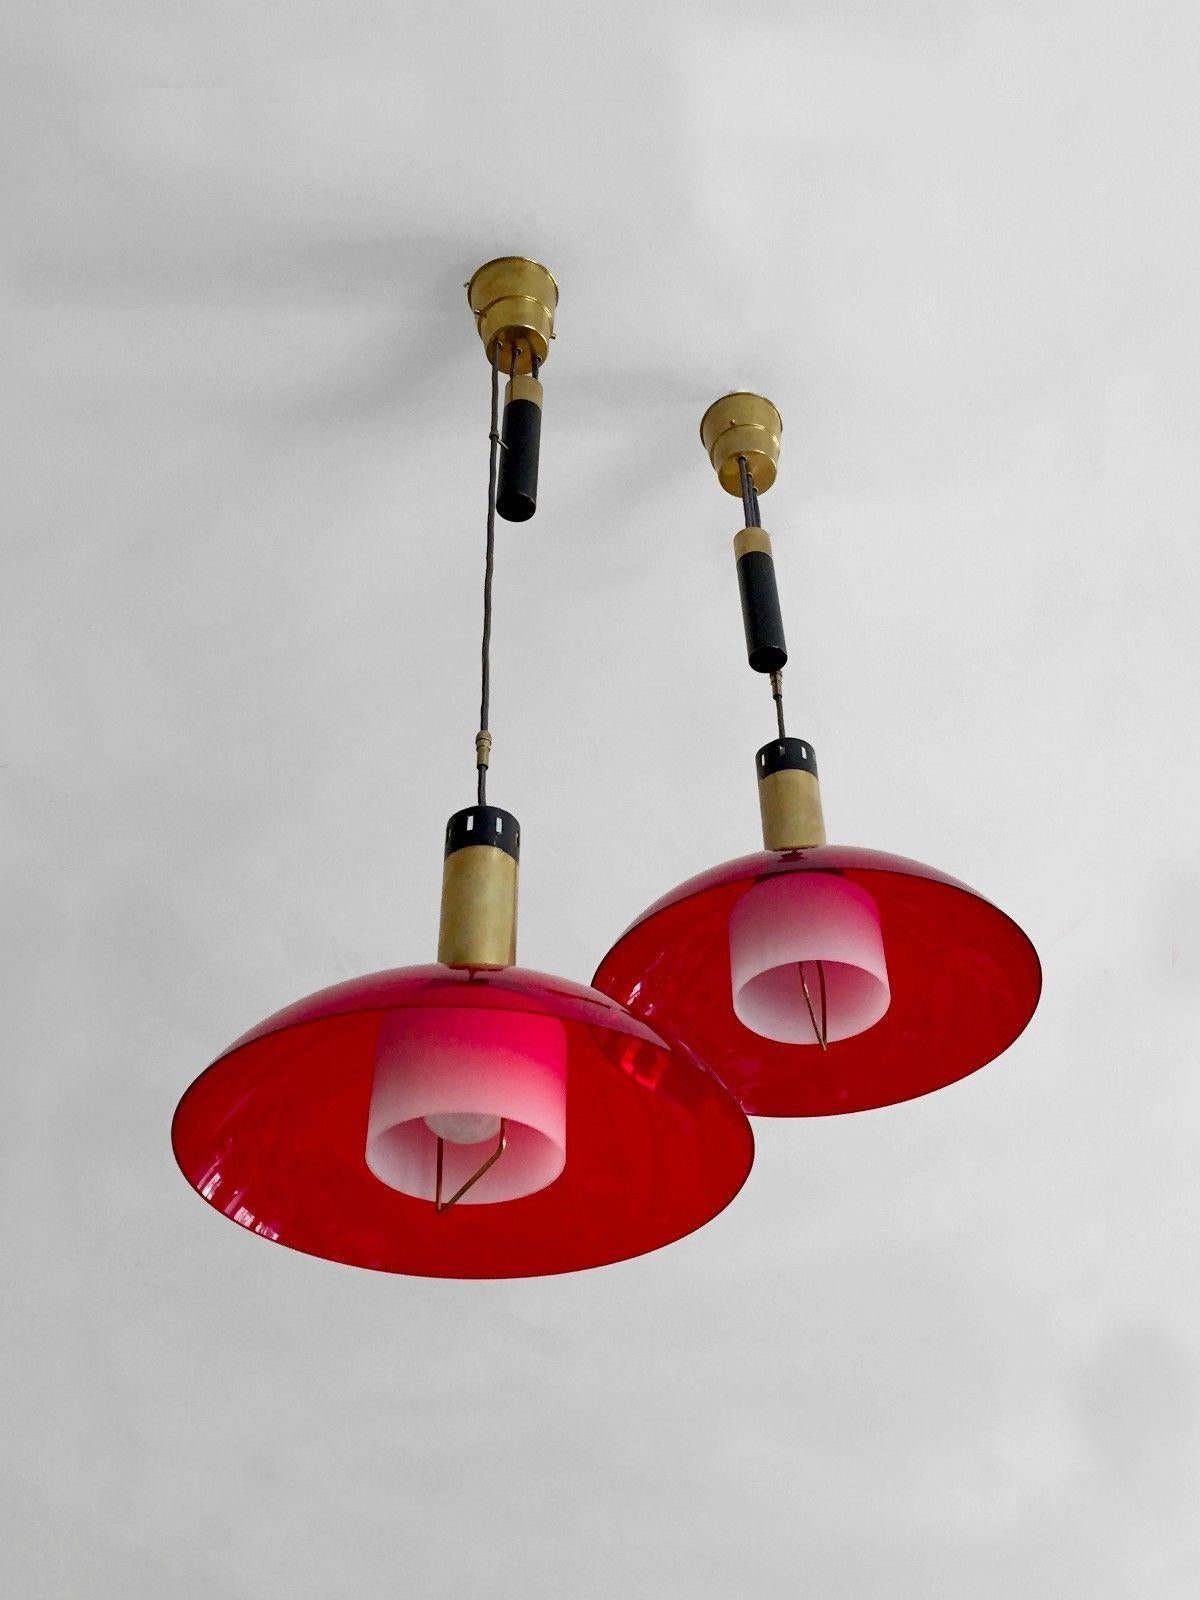 An exceptional pair of counterweight pendants, Modernist, Bauhaus, Constructivist, Free Form, in black lacquered metal, gilded brass, white opaline glass and red perspex, Stilux edition, Italy 1950-1960.

DIMENSIONS OF EACH PENDANT: Diam 40 x H 30